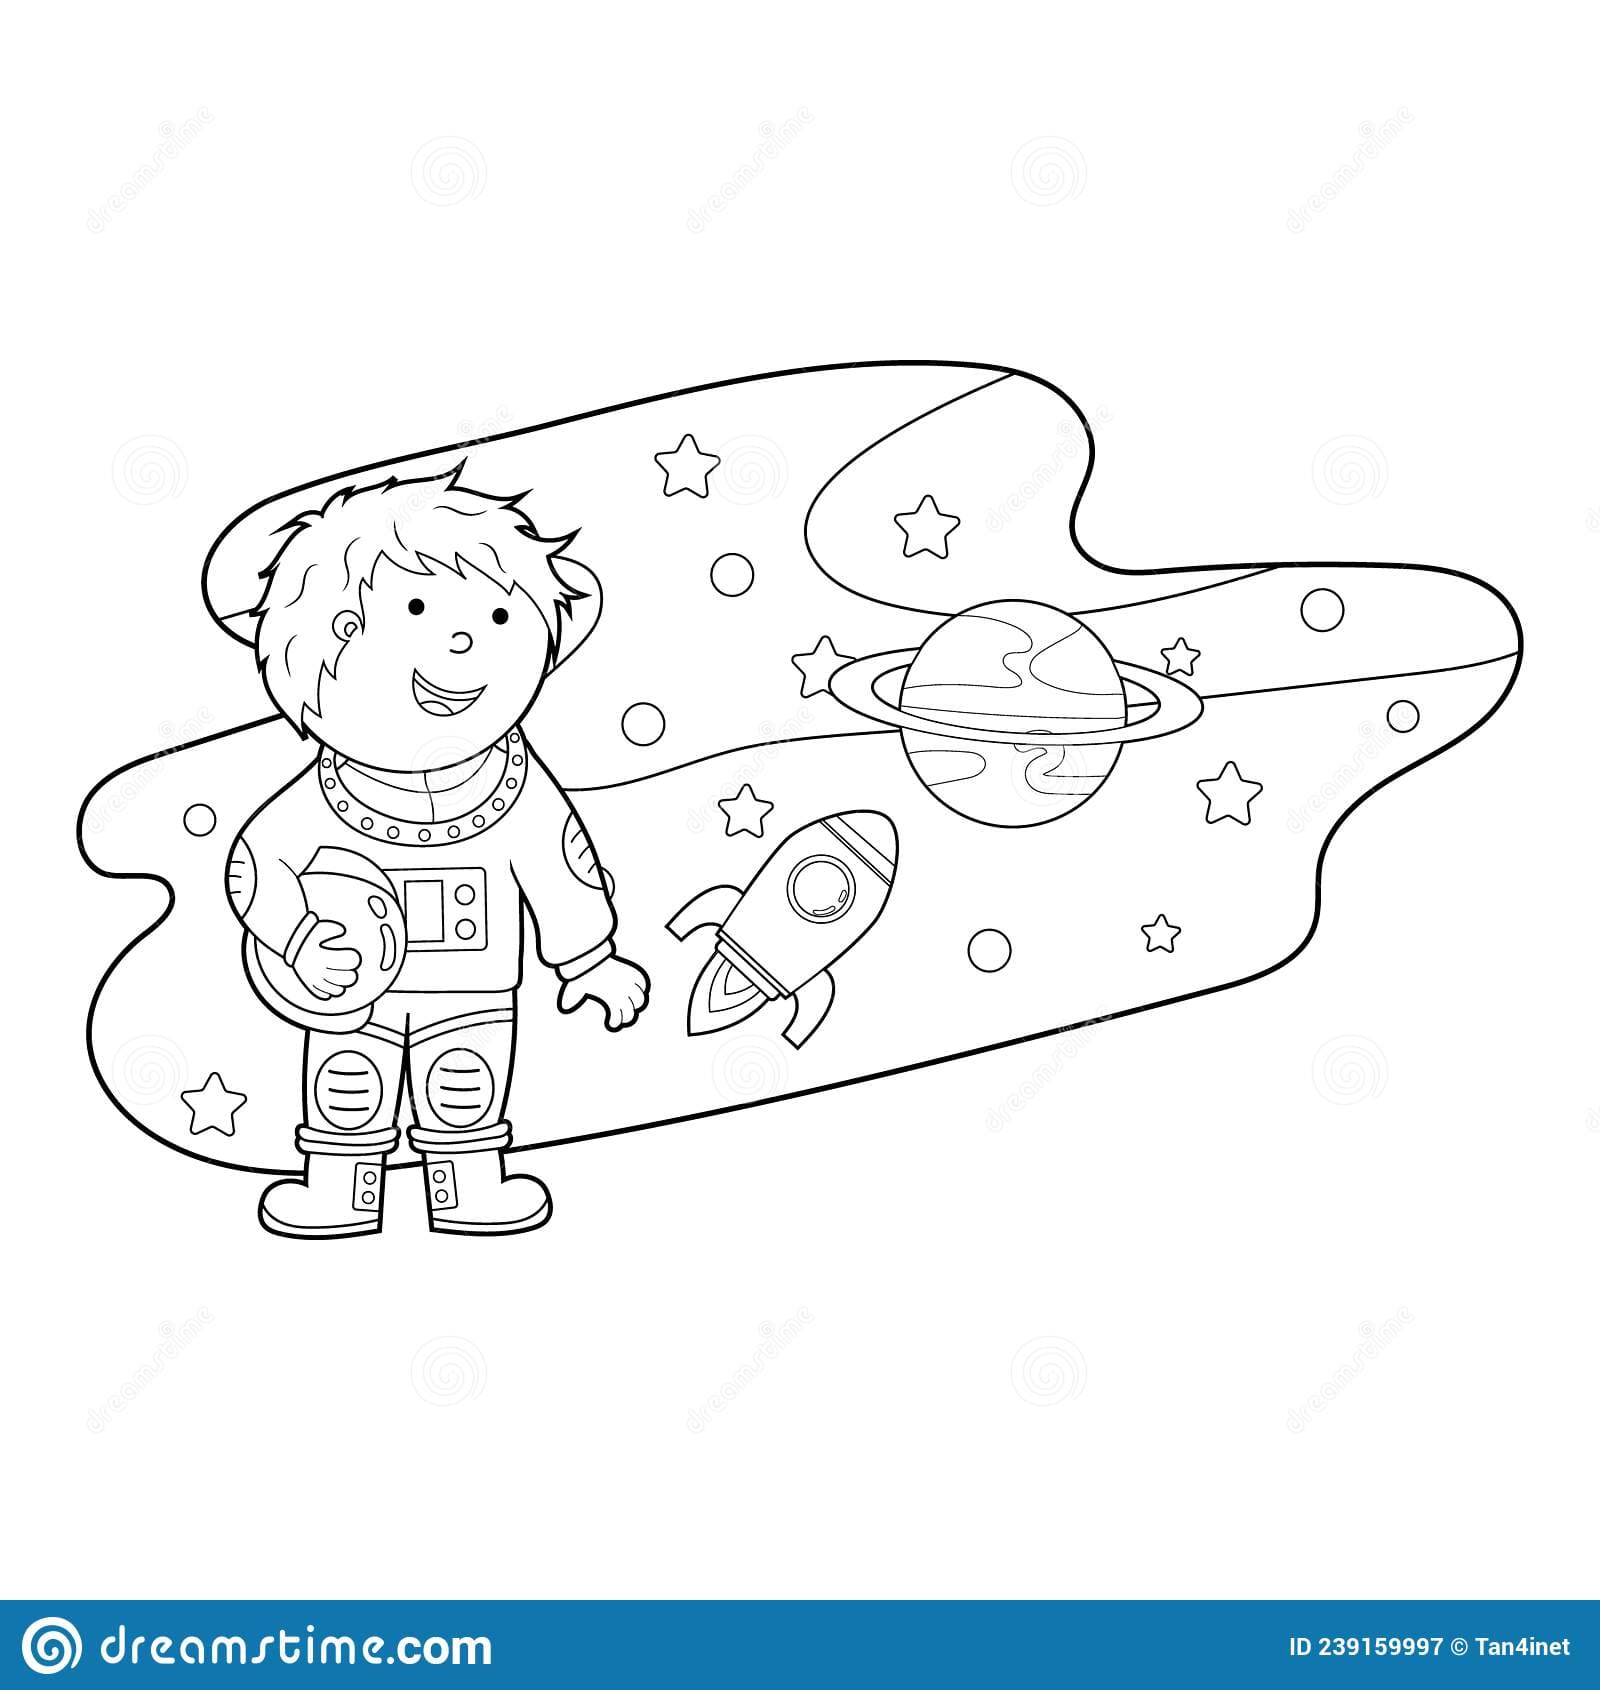 Color a cartoon illustration of an astronaut in space